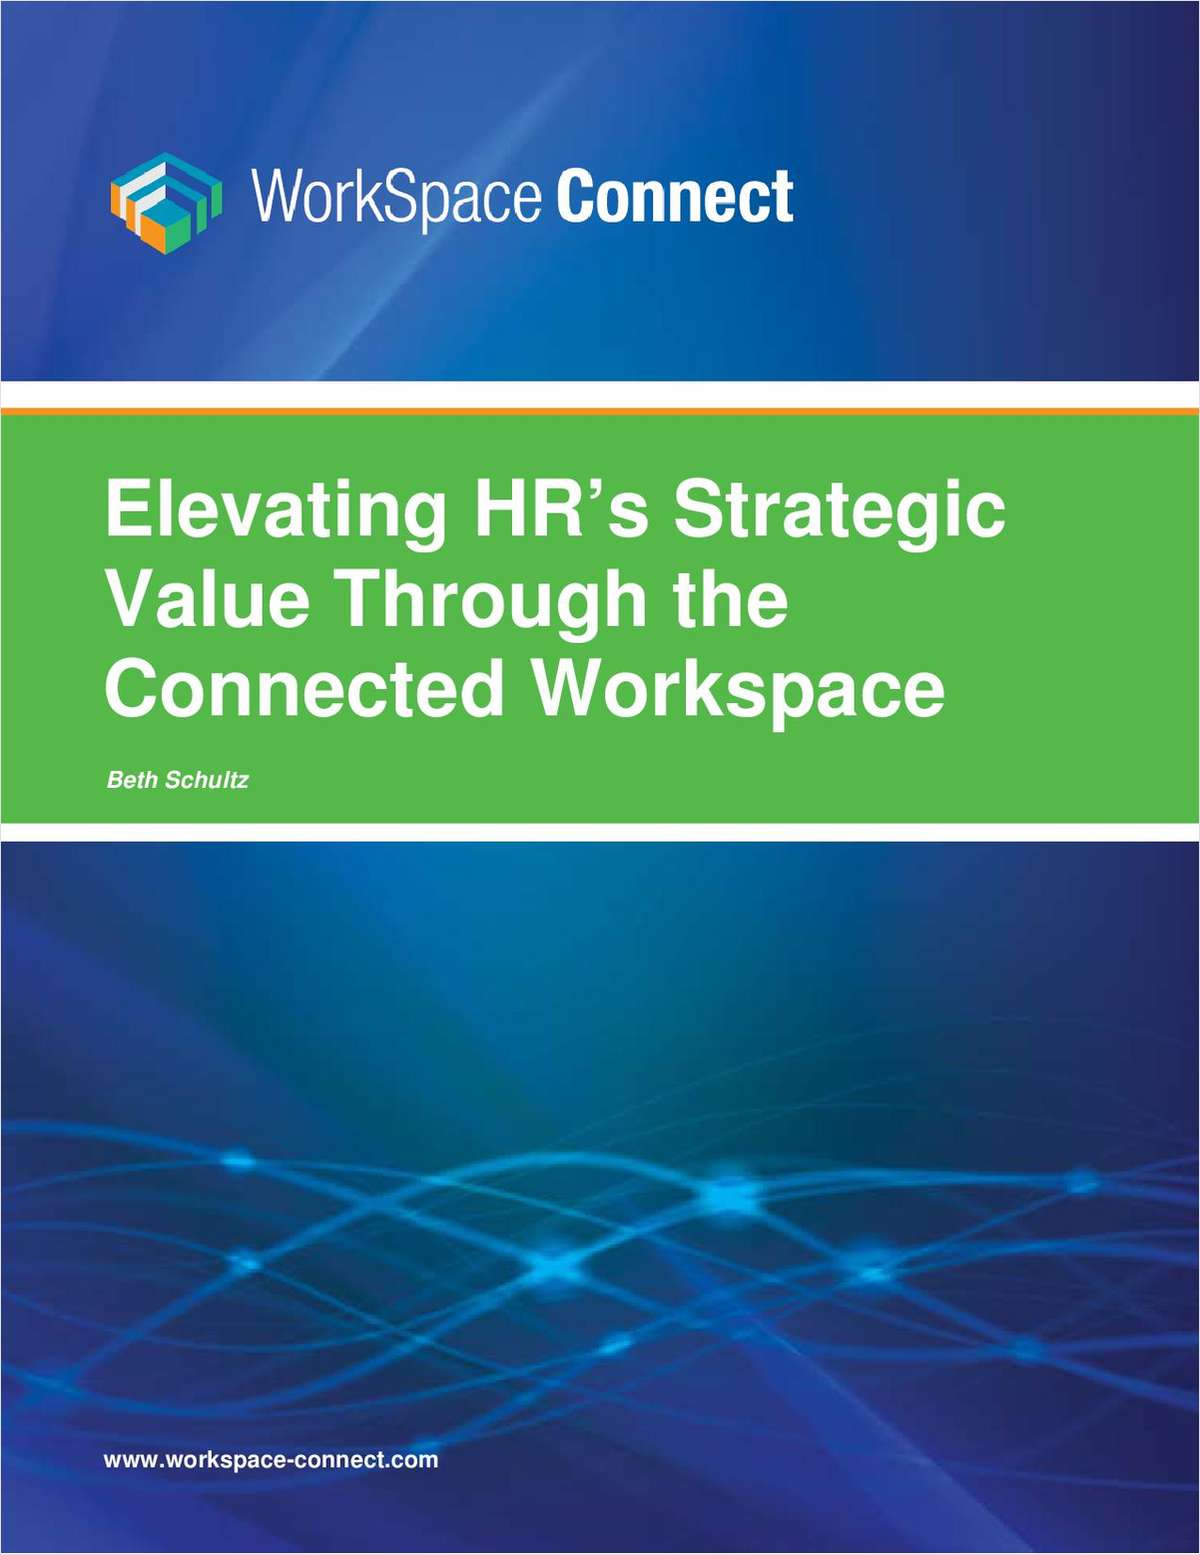 Elevating HR's Strategic Value Through the Connected Workspace